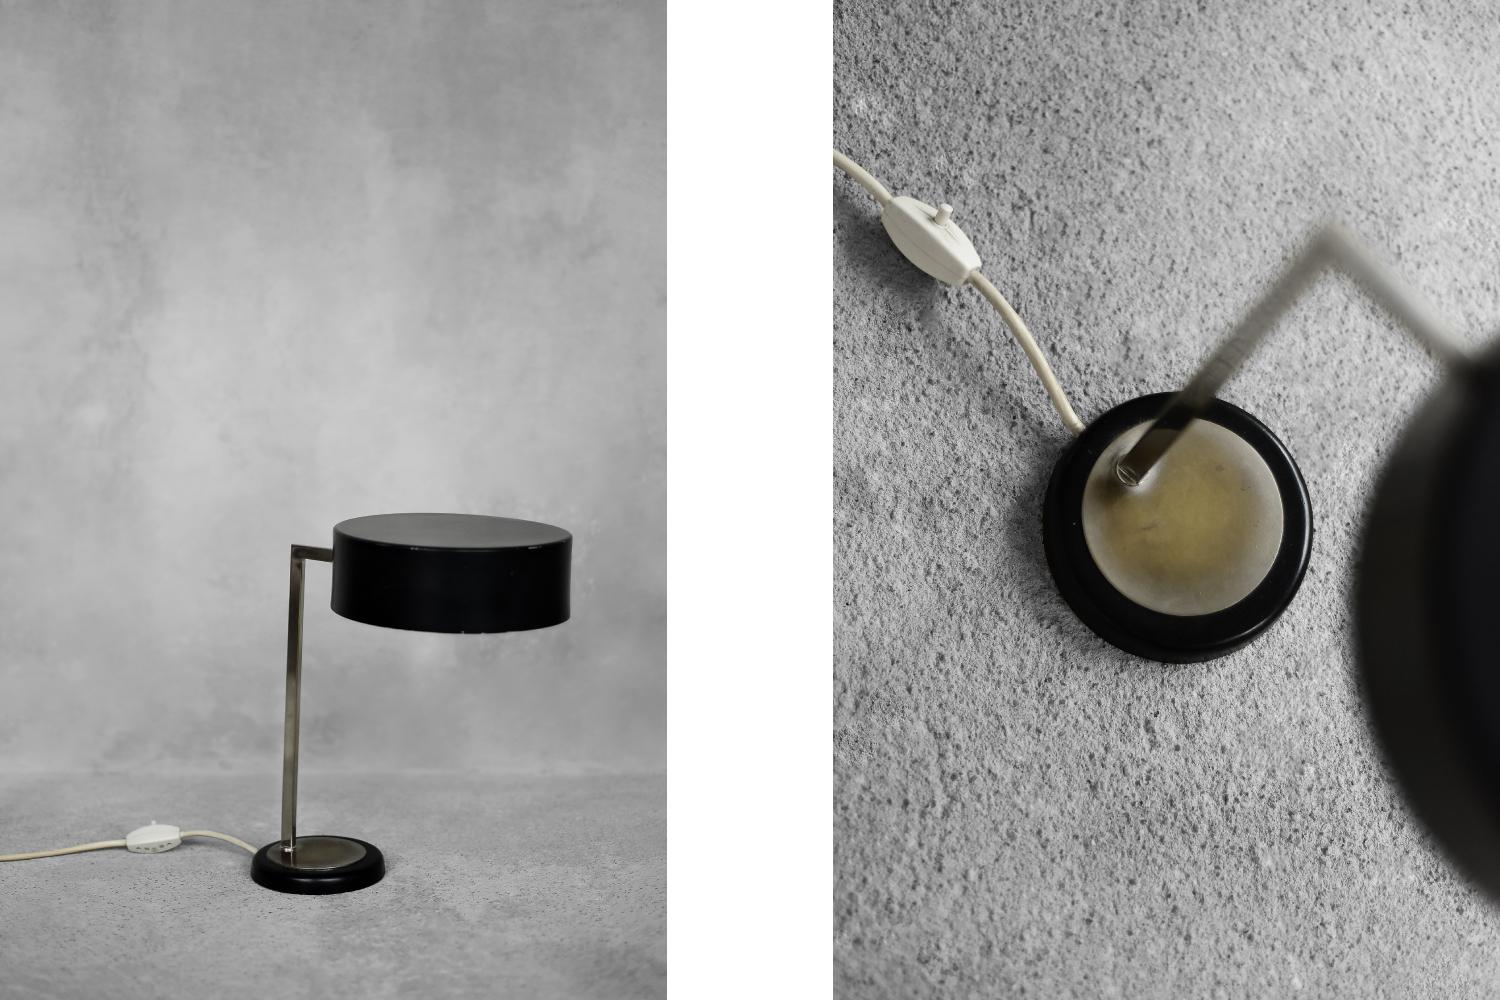 This minimalist lamp was produced in Germany during the 1960s. The lamp captivates with its simple design. The black metal lampshade and round base are connected by a solid, sharp arm. The lamp has strong light concentrated in one point, which